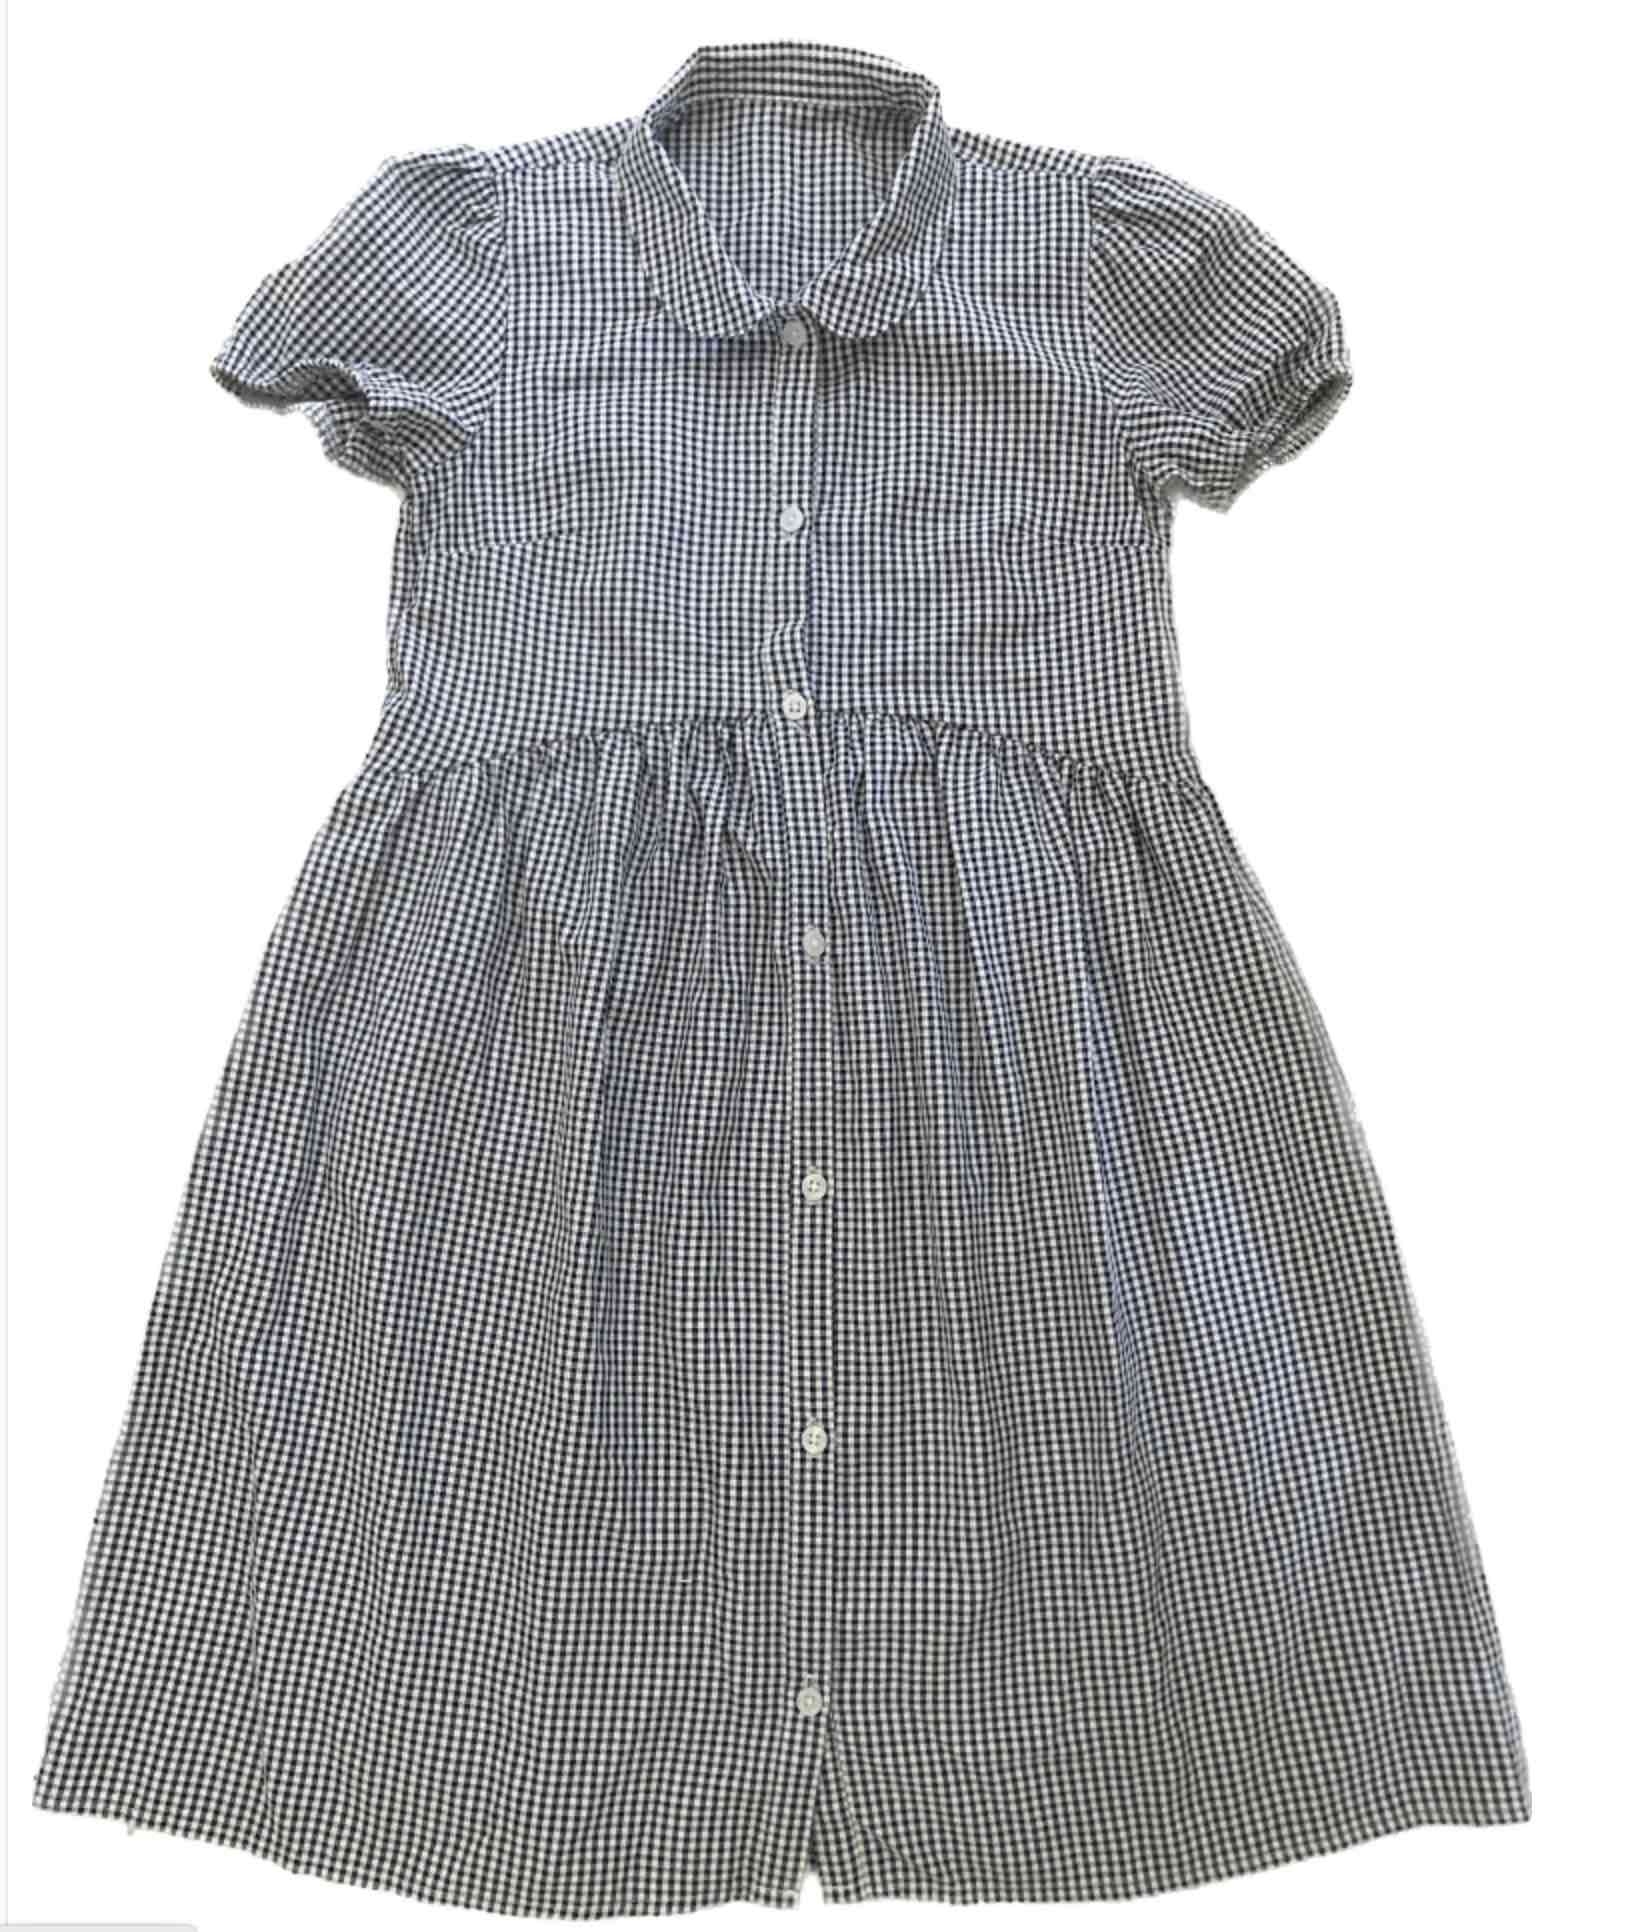 Girls' Navy Blue Gingham Summer Dress, Button Front, Gathered Skirt, 12-13 Y